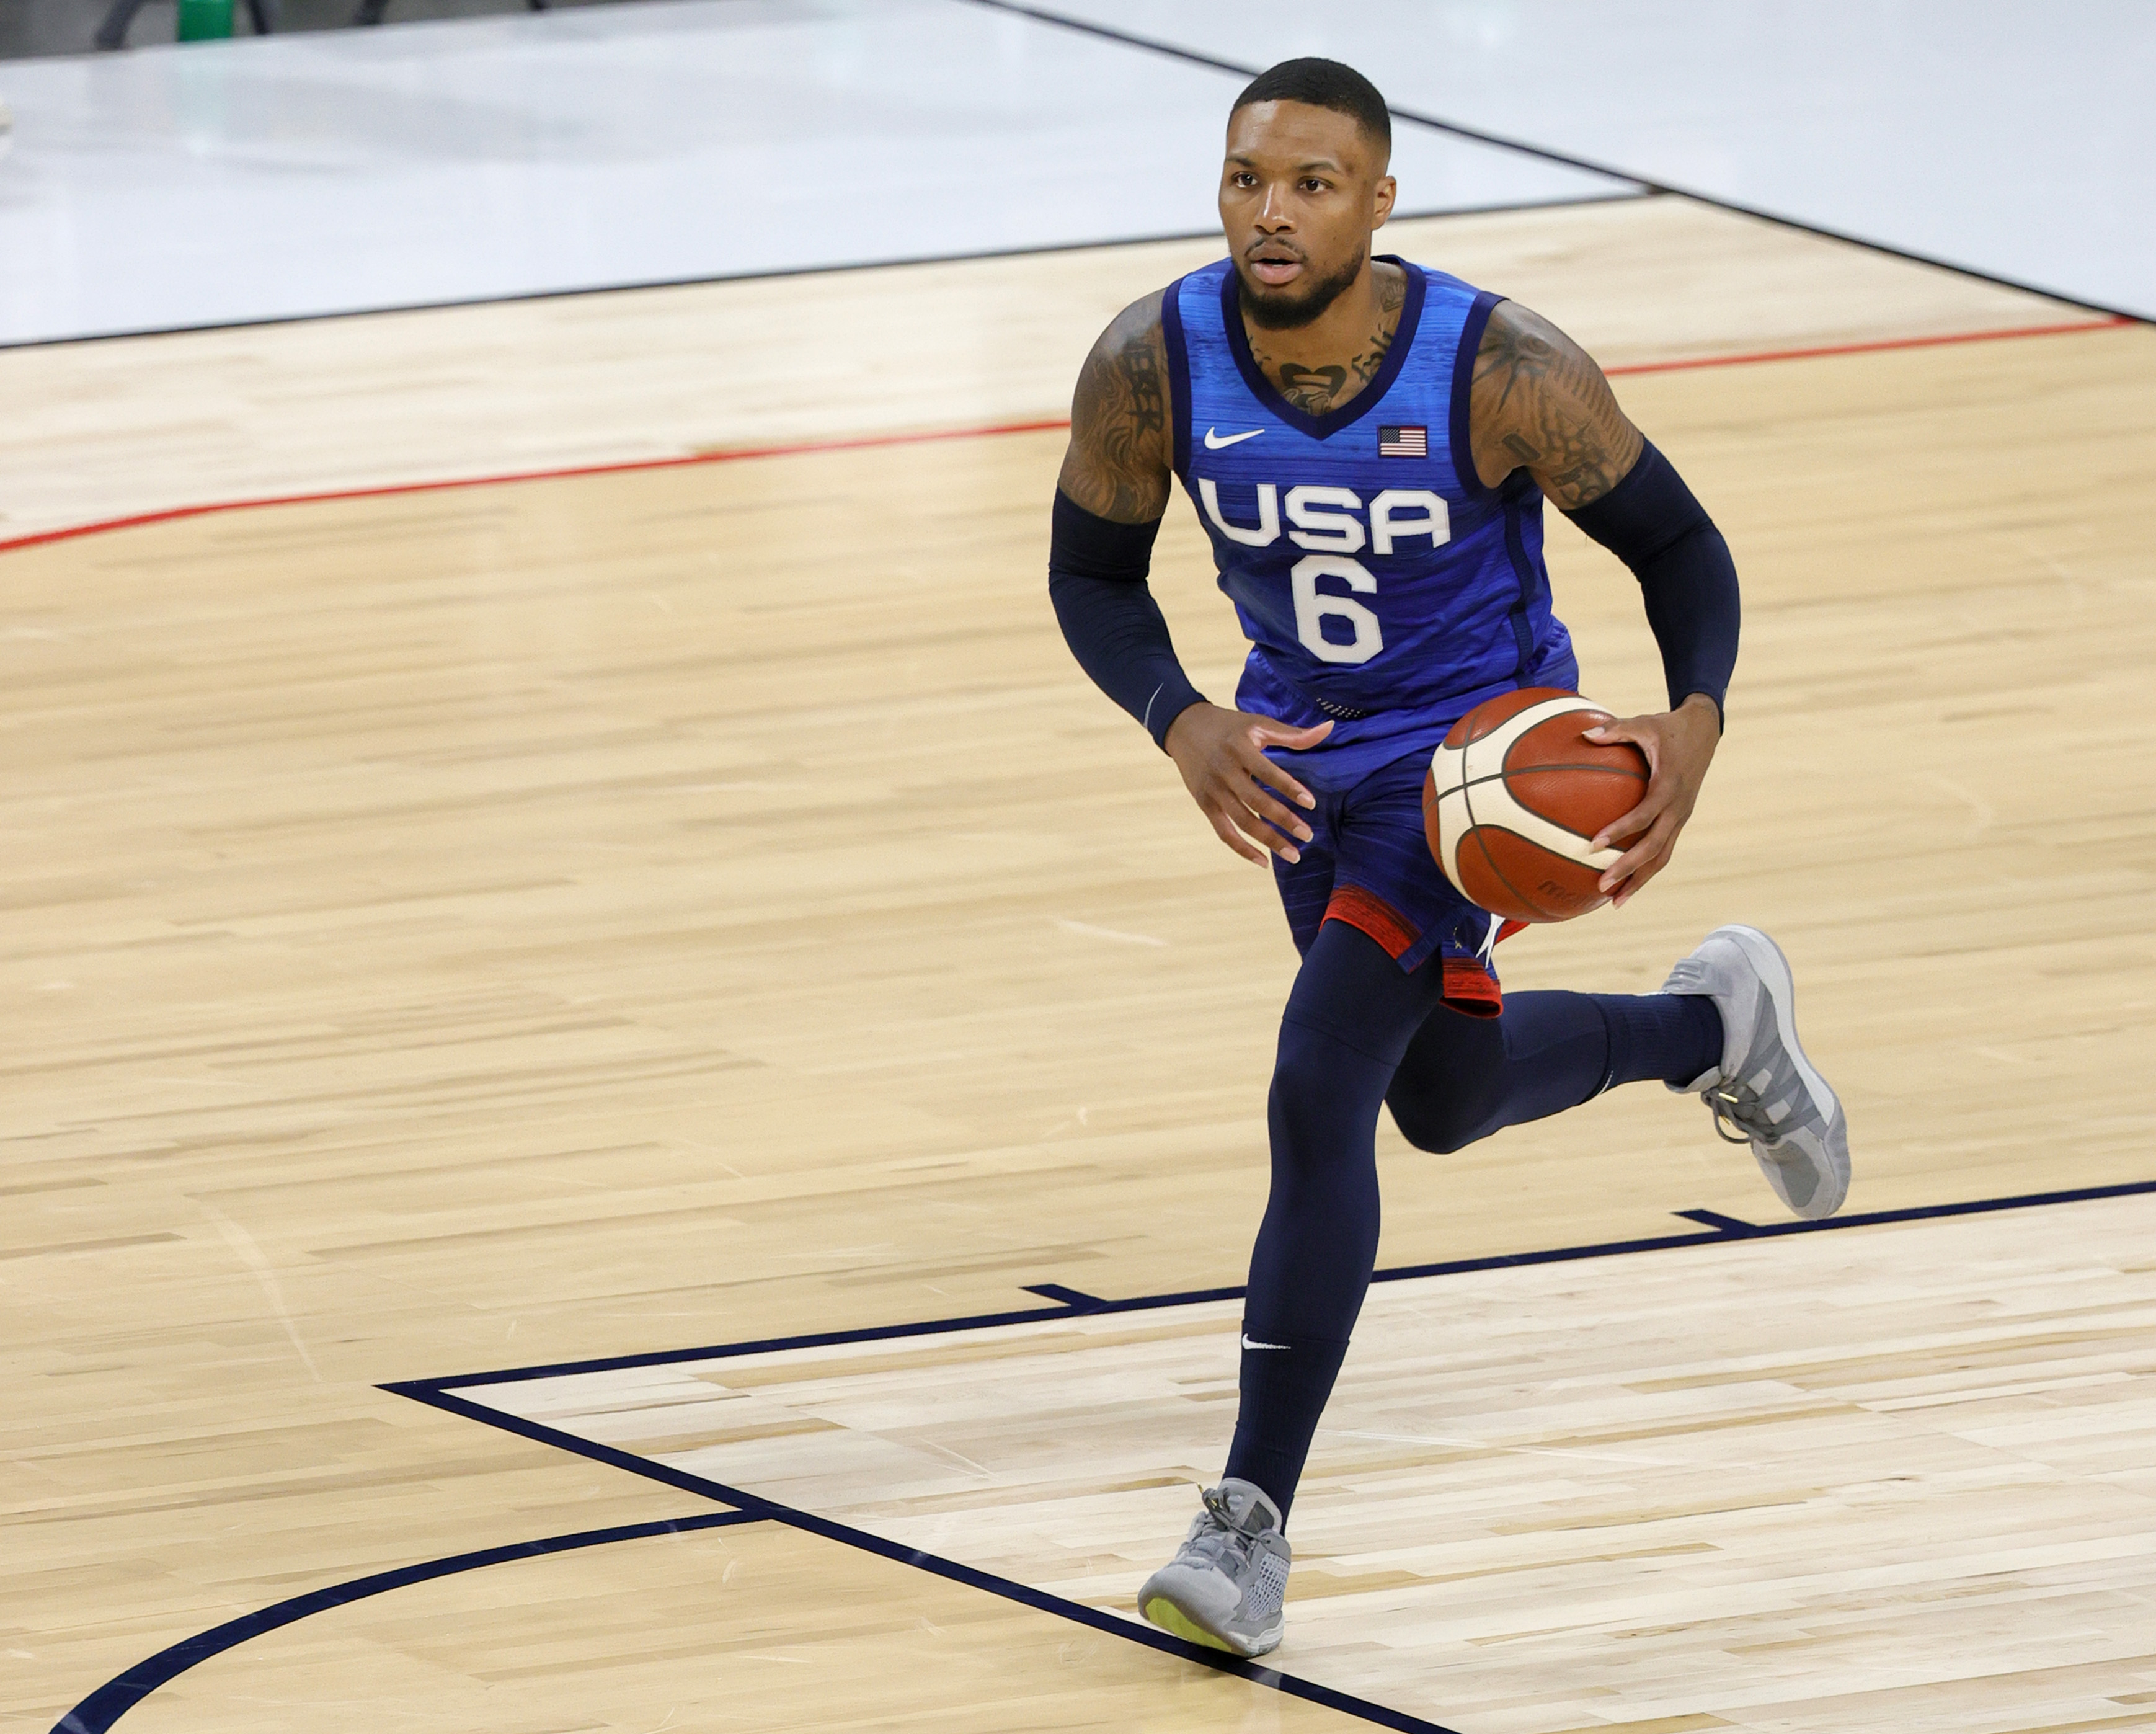 Damian Lillard dribbles up the floor during Team USA's exhibition game against Australia.